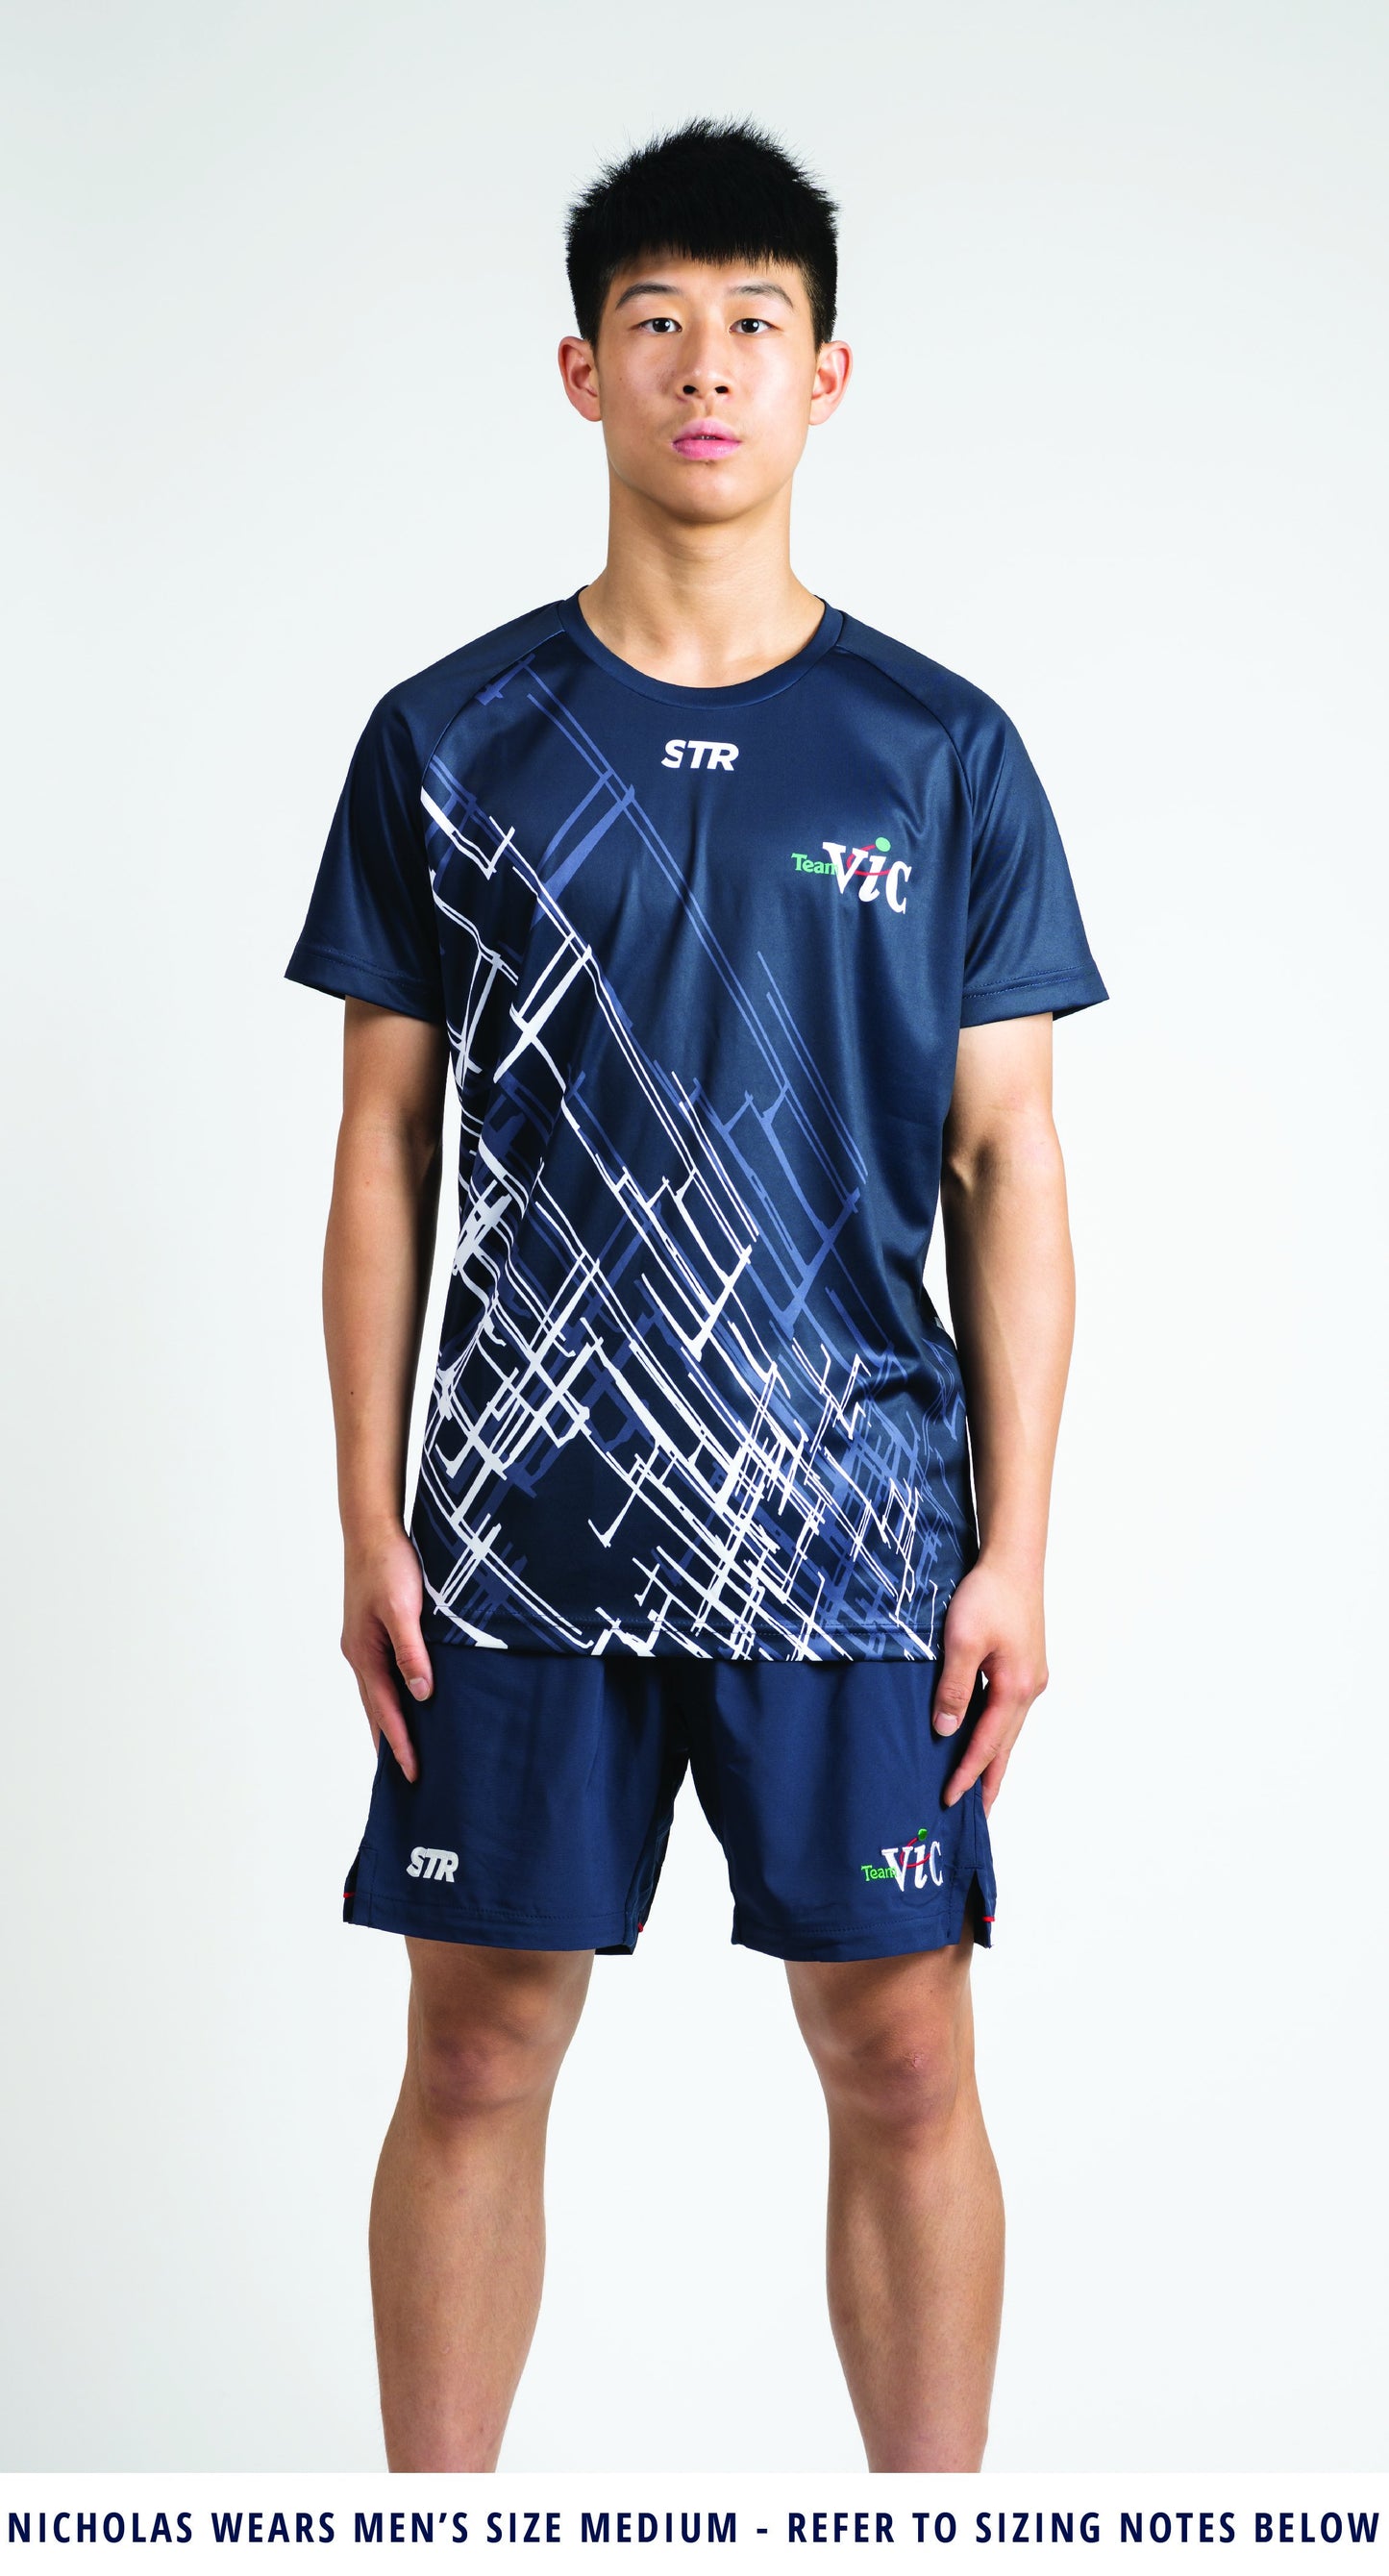 Male Team Vic Shorts (2022  Run Out Stock)